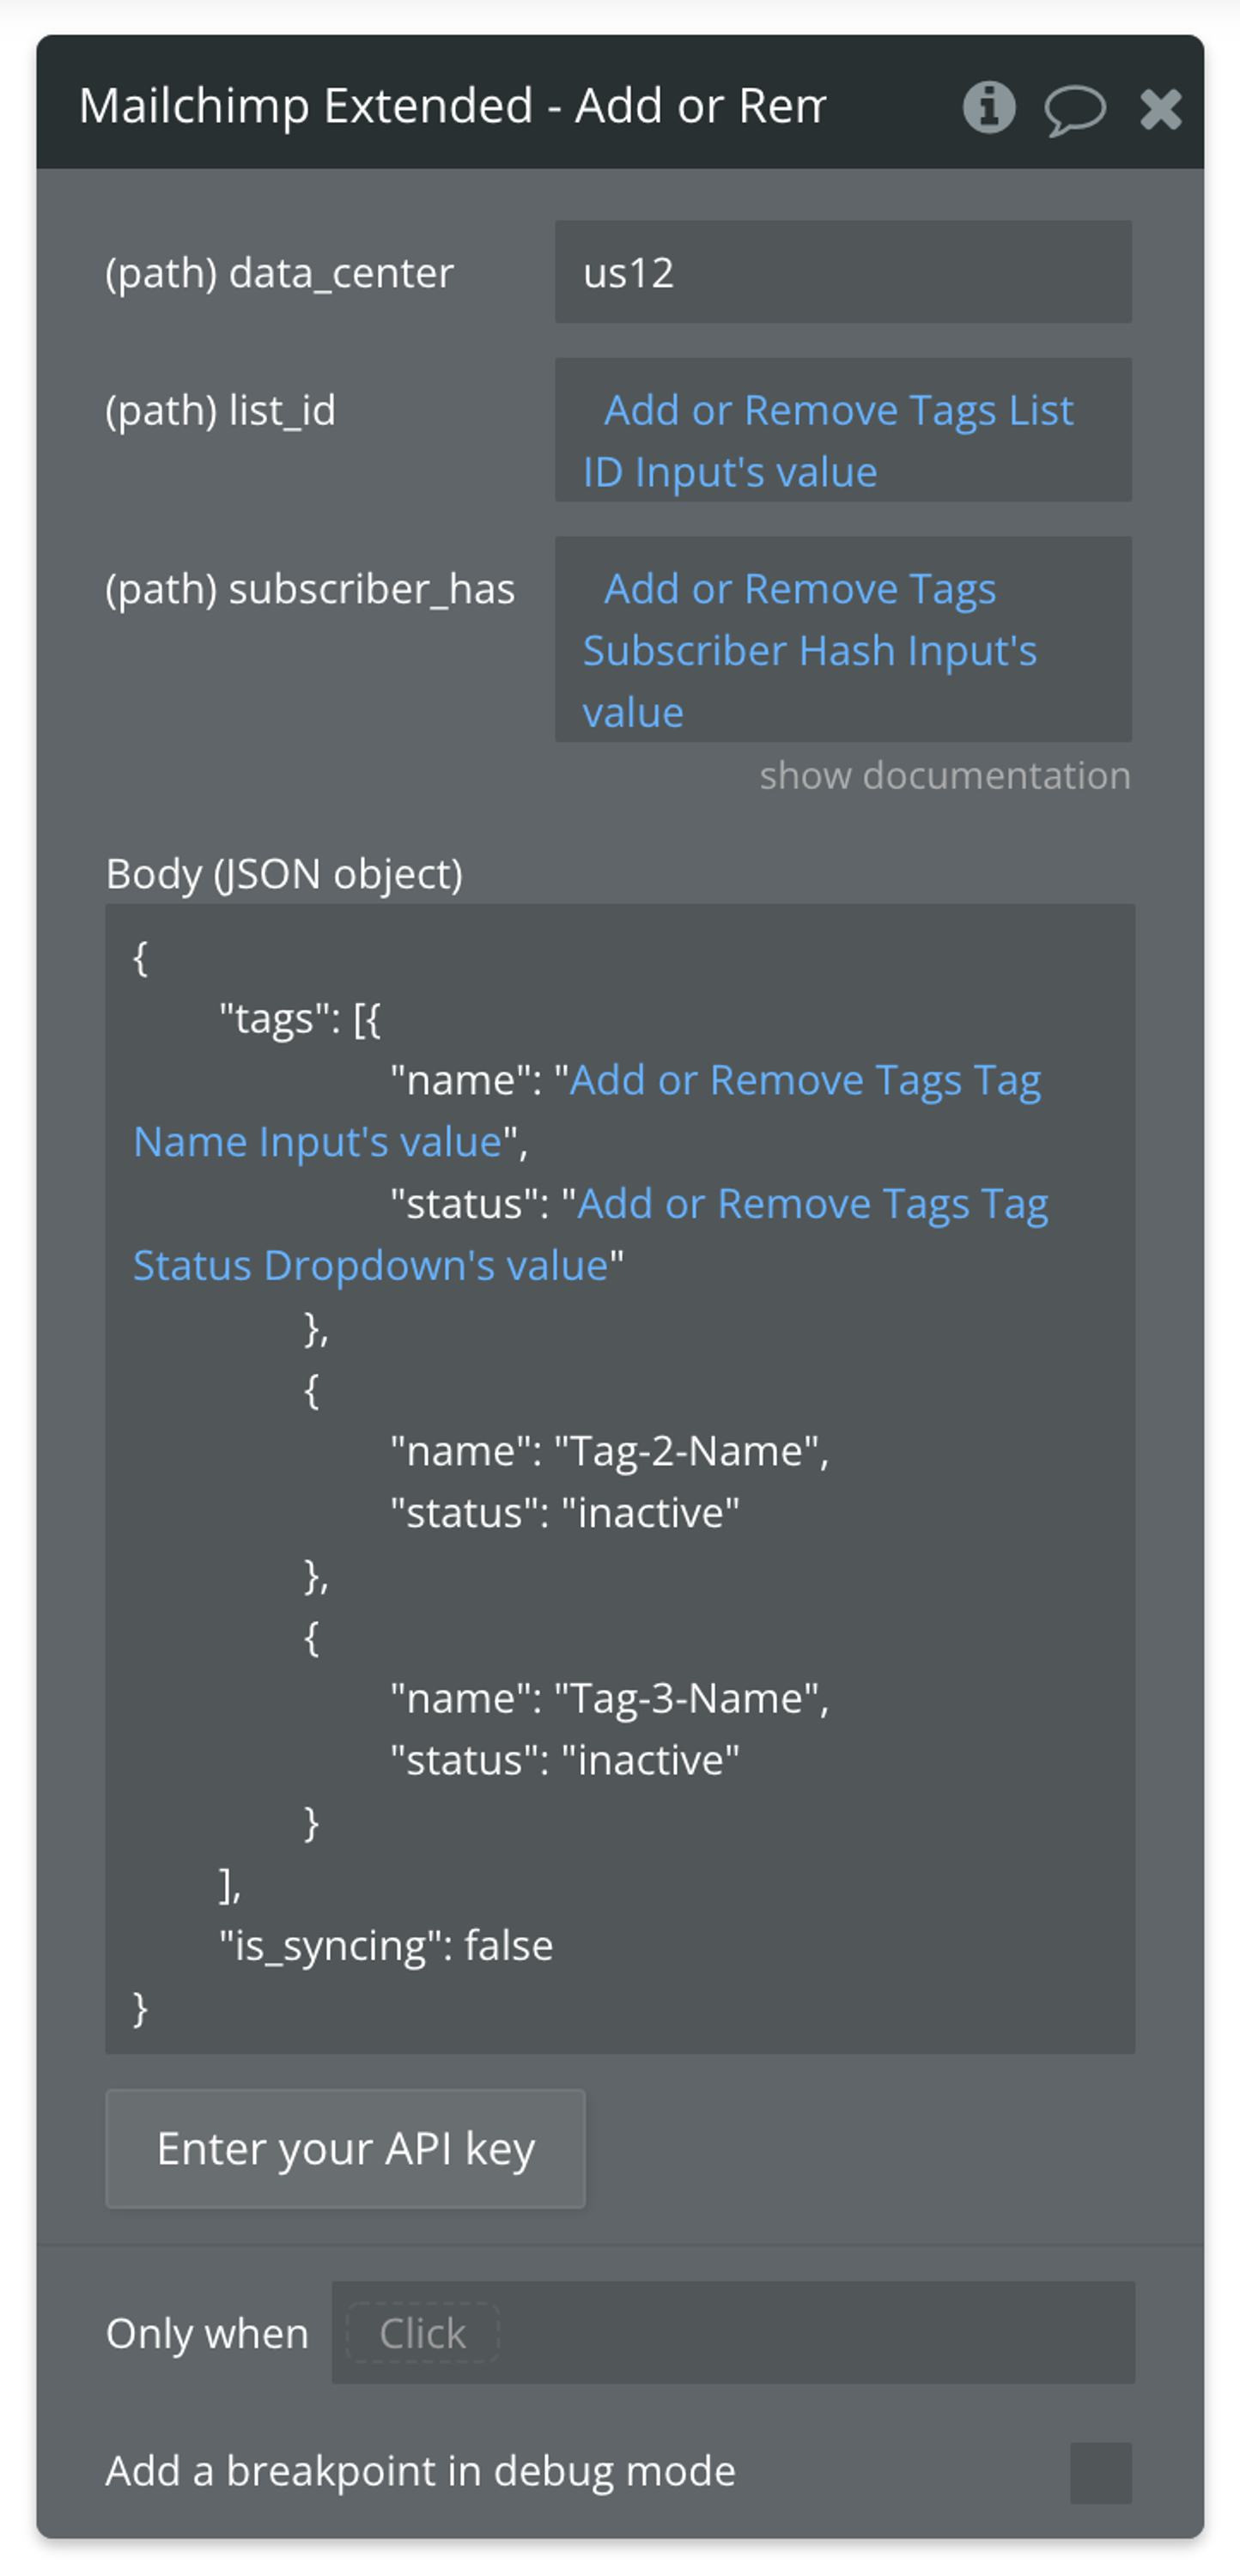 Only one tag is set up dynamically in this example. You can add/remove as many additional tags as you need.